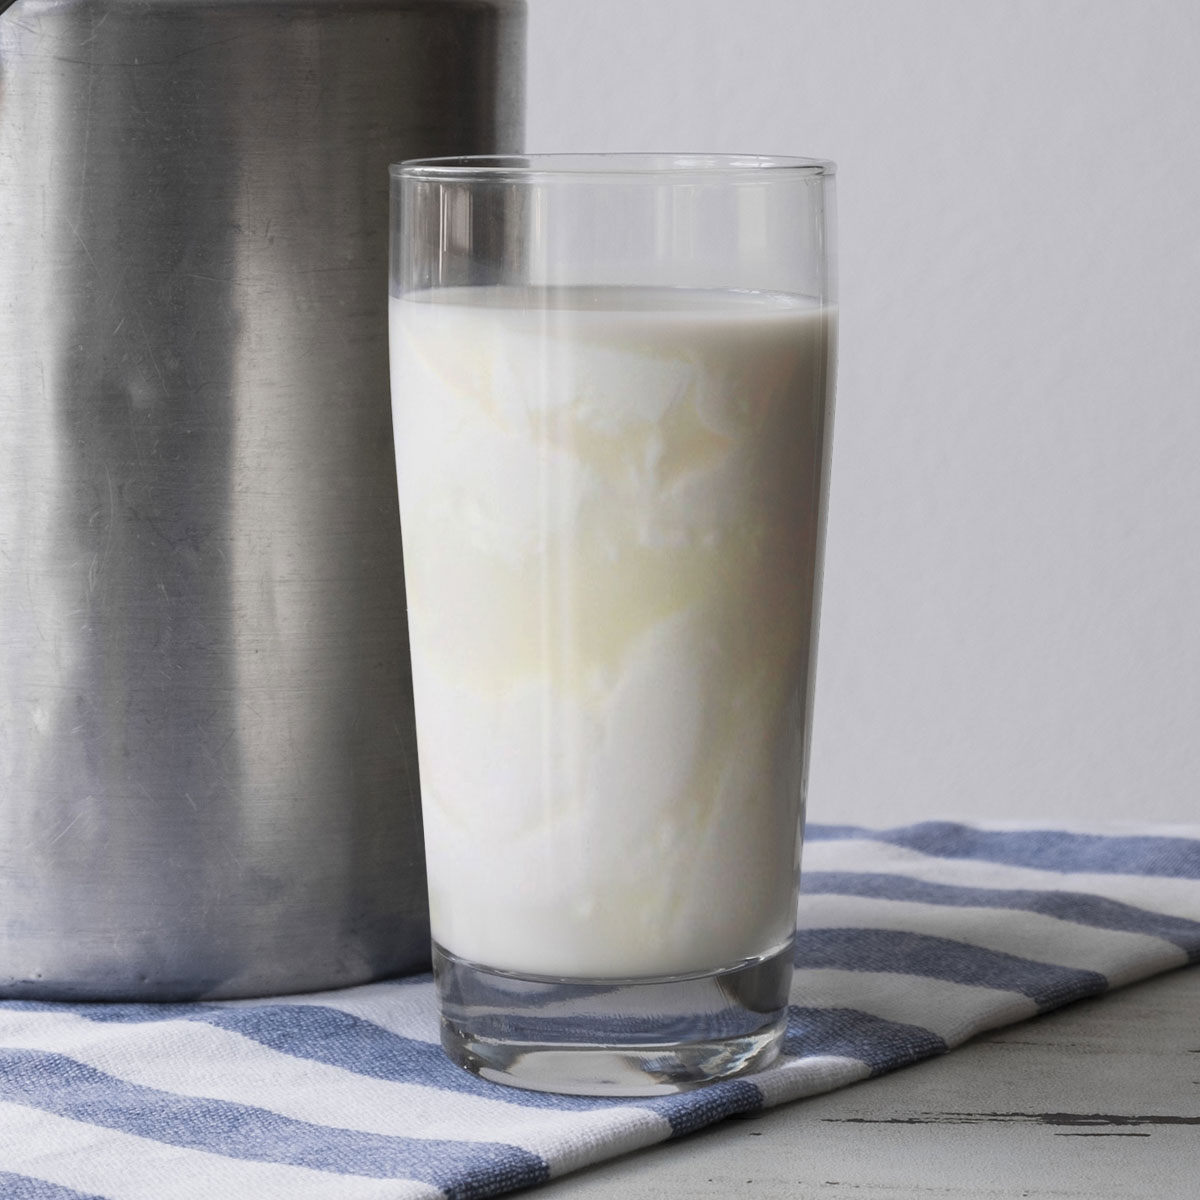 Soured Milk in a glass